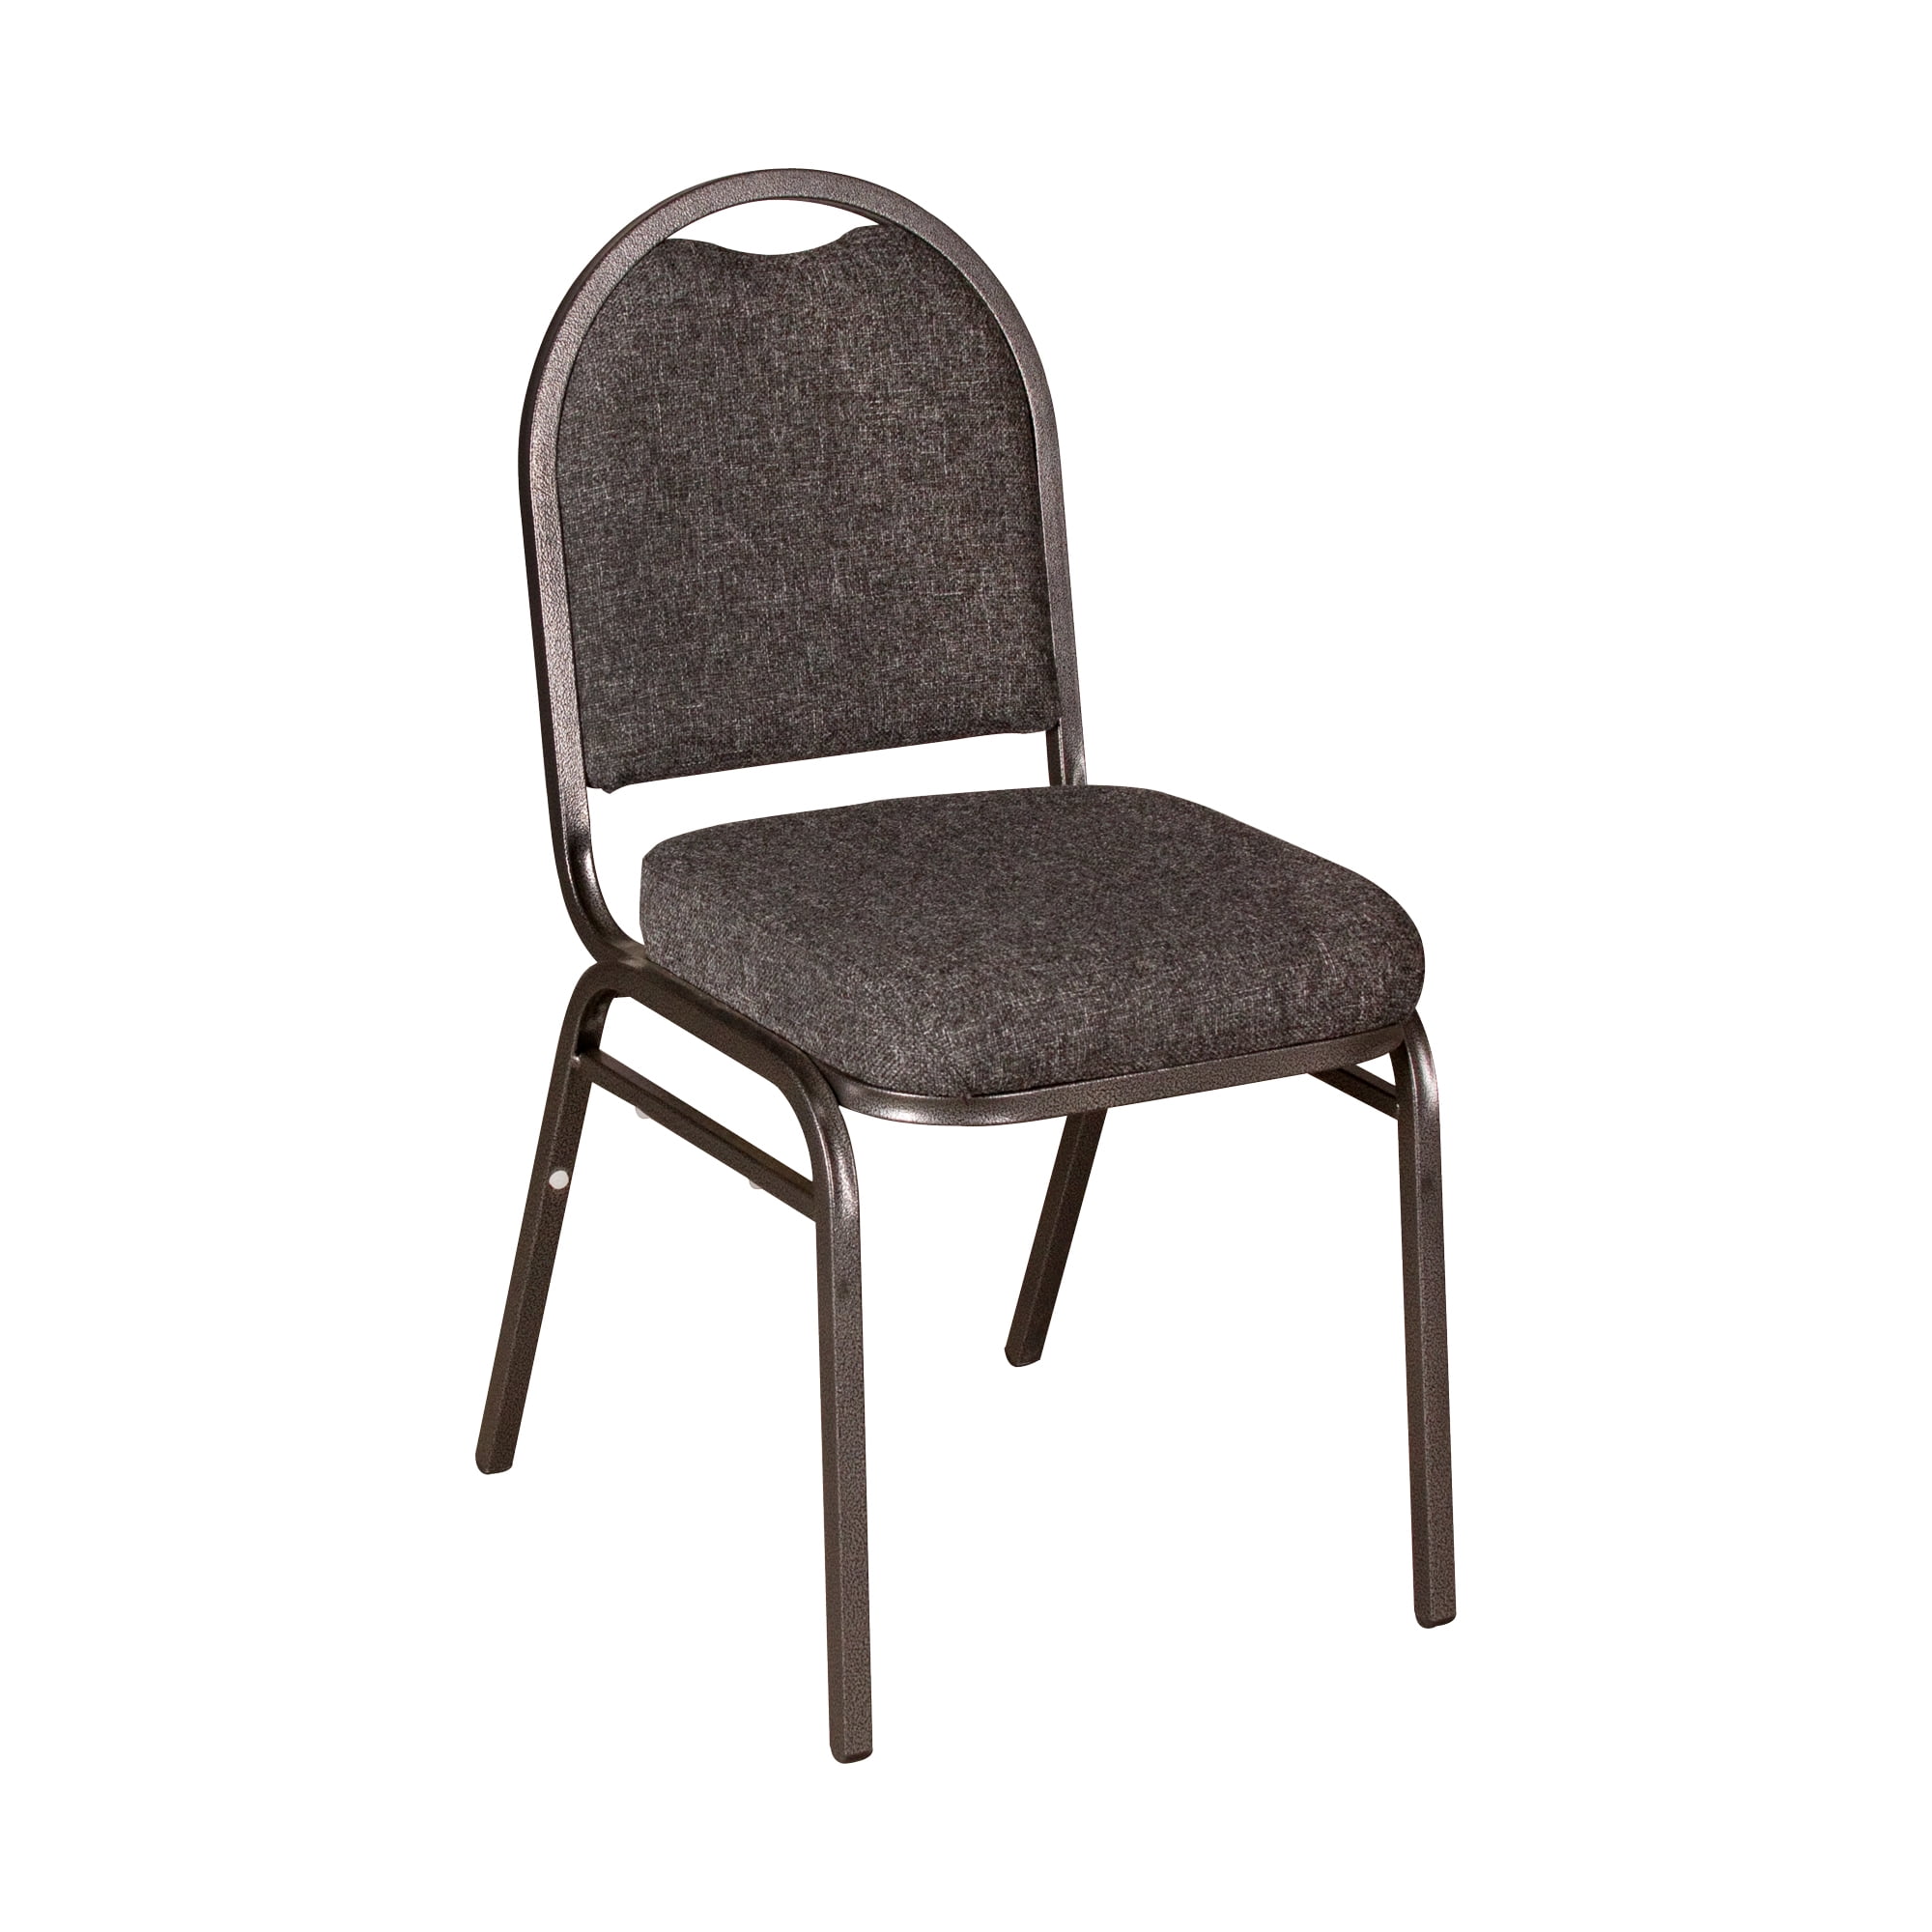 NPS 2300 Series Deluxe Fabric Premium Folding Chair, Pack of 4, Beige